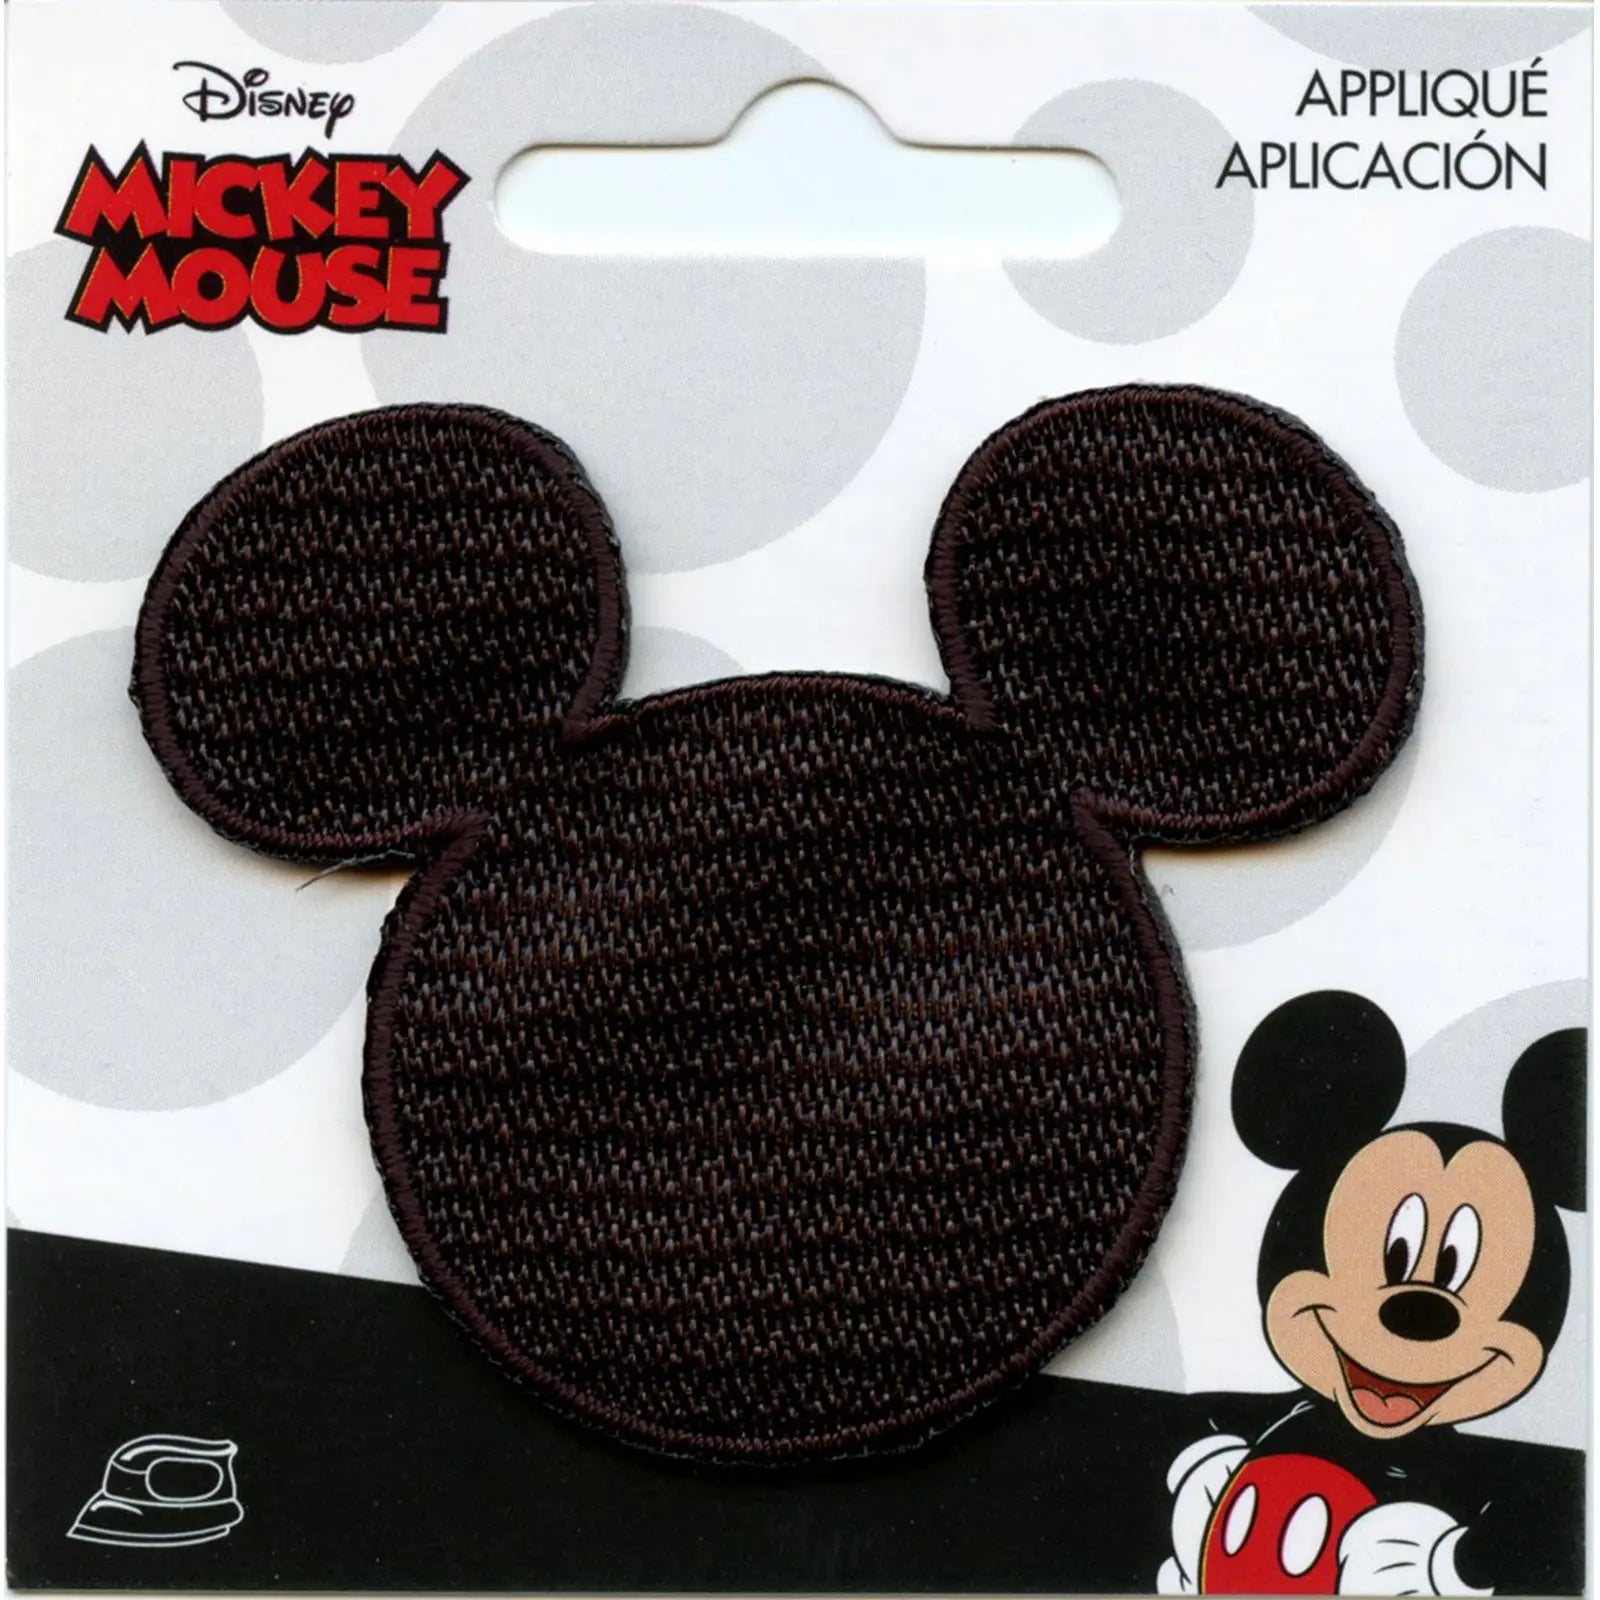 Disney Mickey Mouse Head Silhouette Iron on Embroidered Patch 